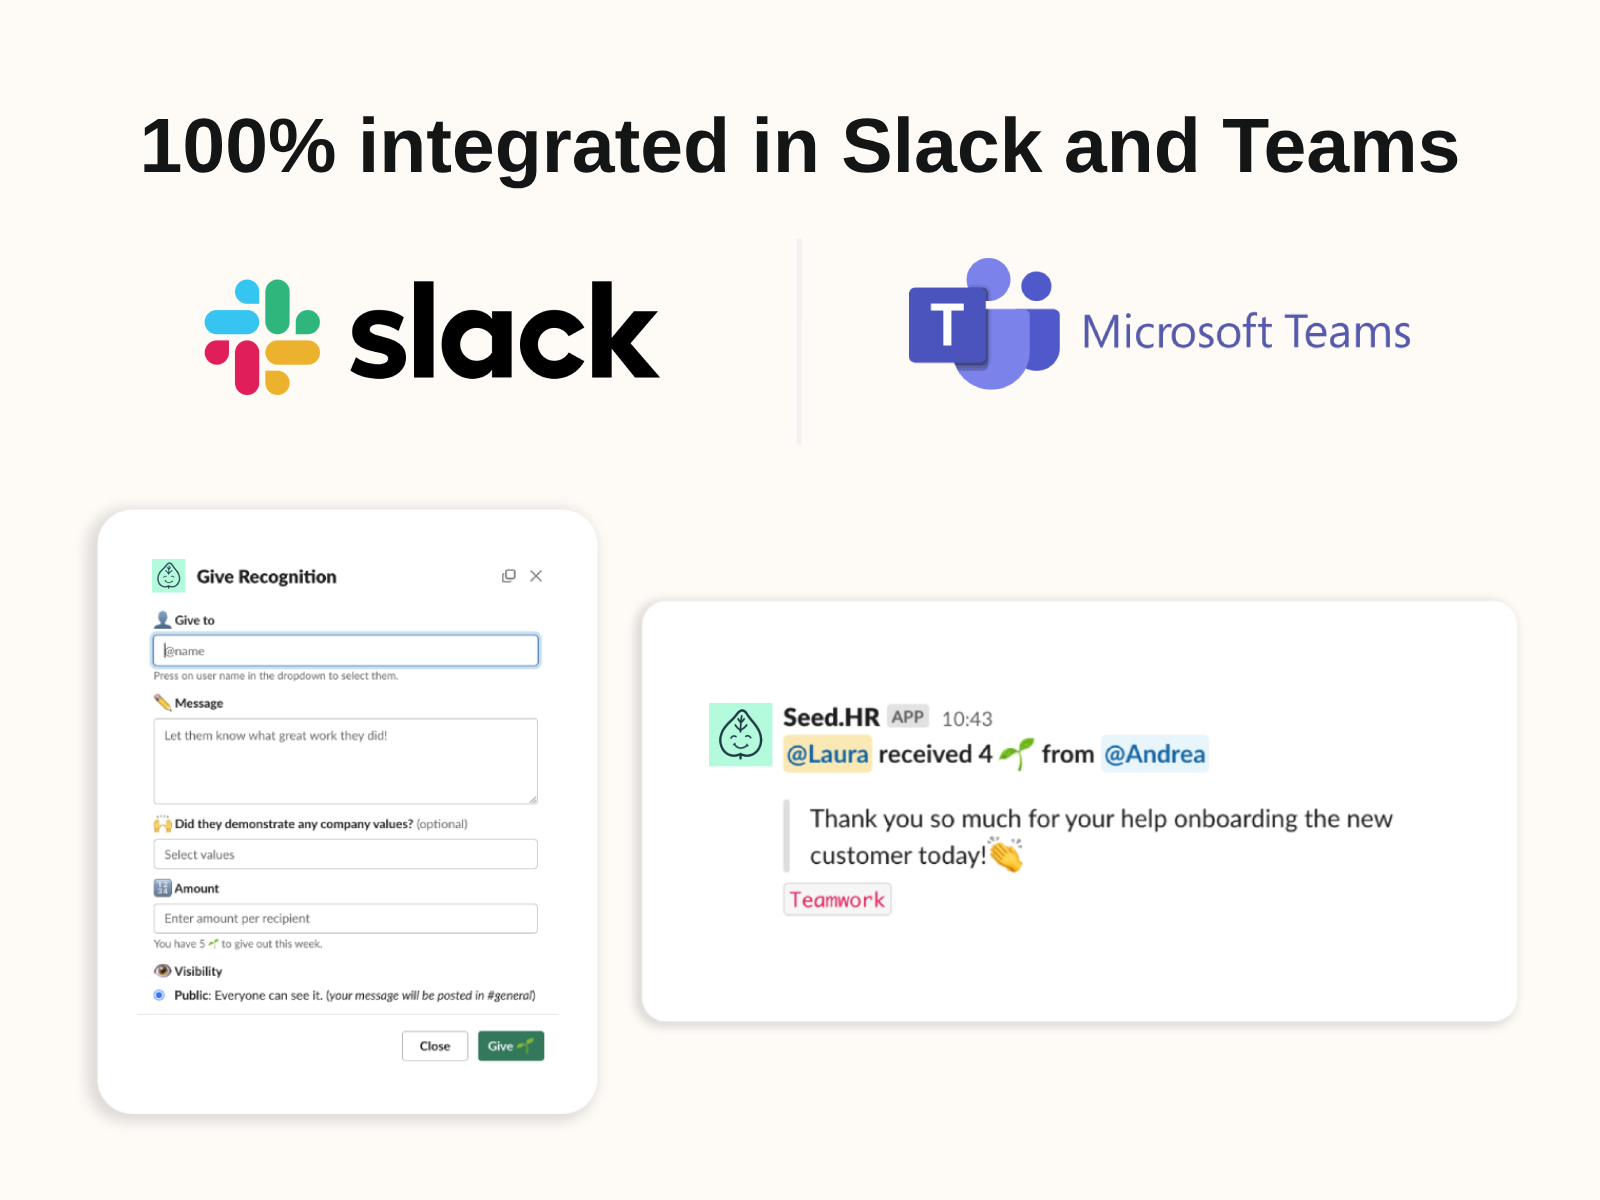 Seed is integrated in Slack and Teams, not Guusto